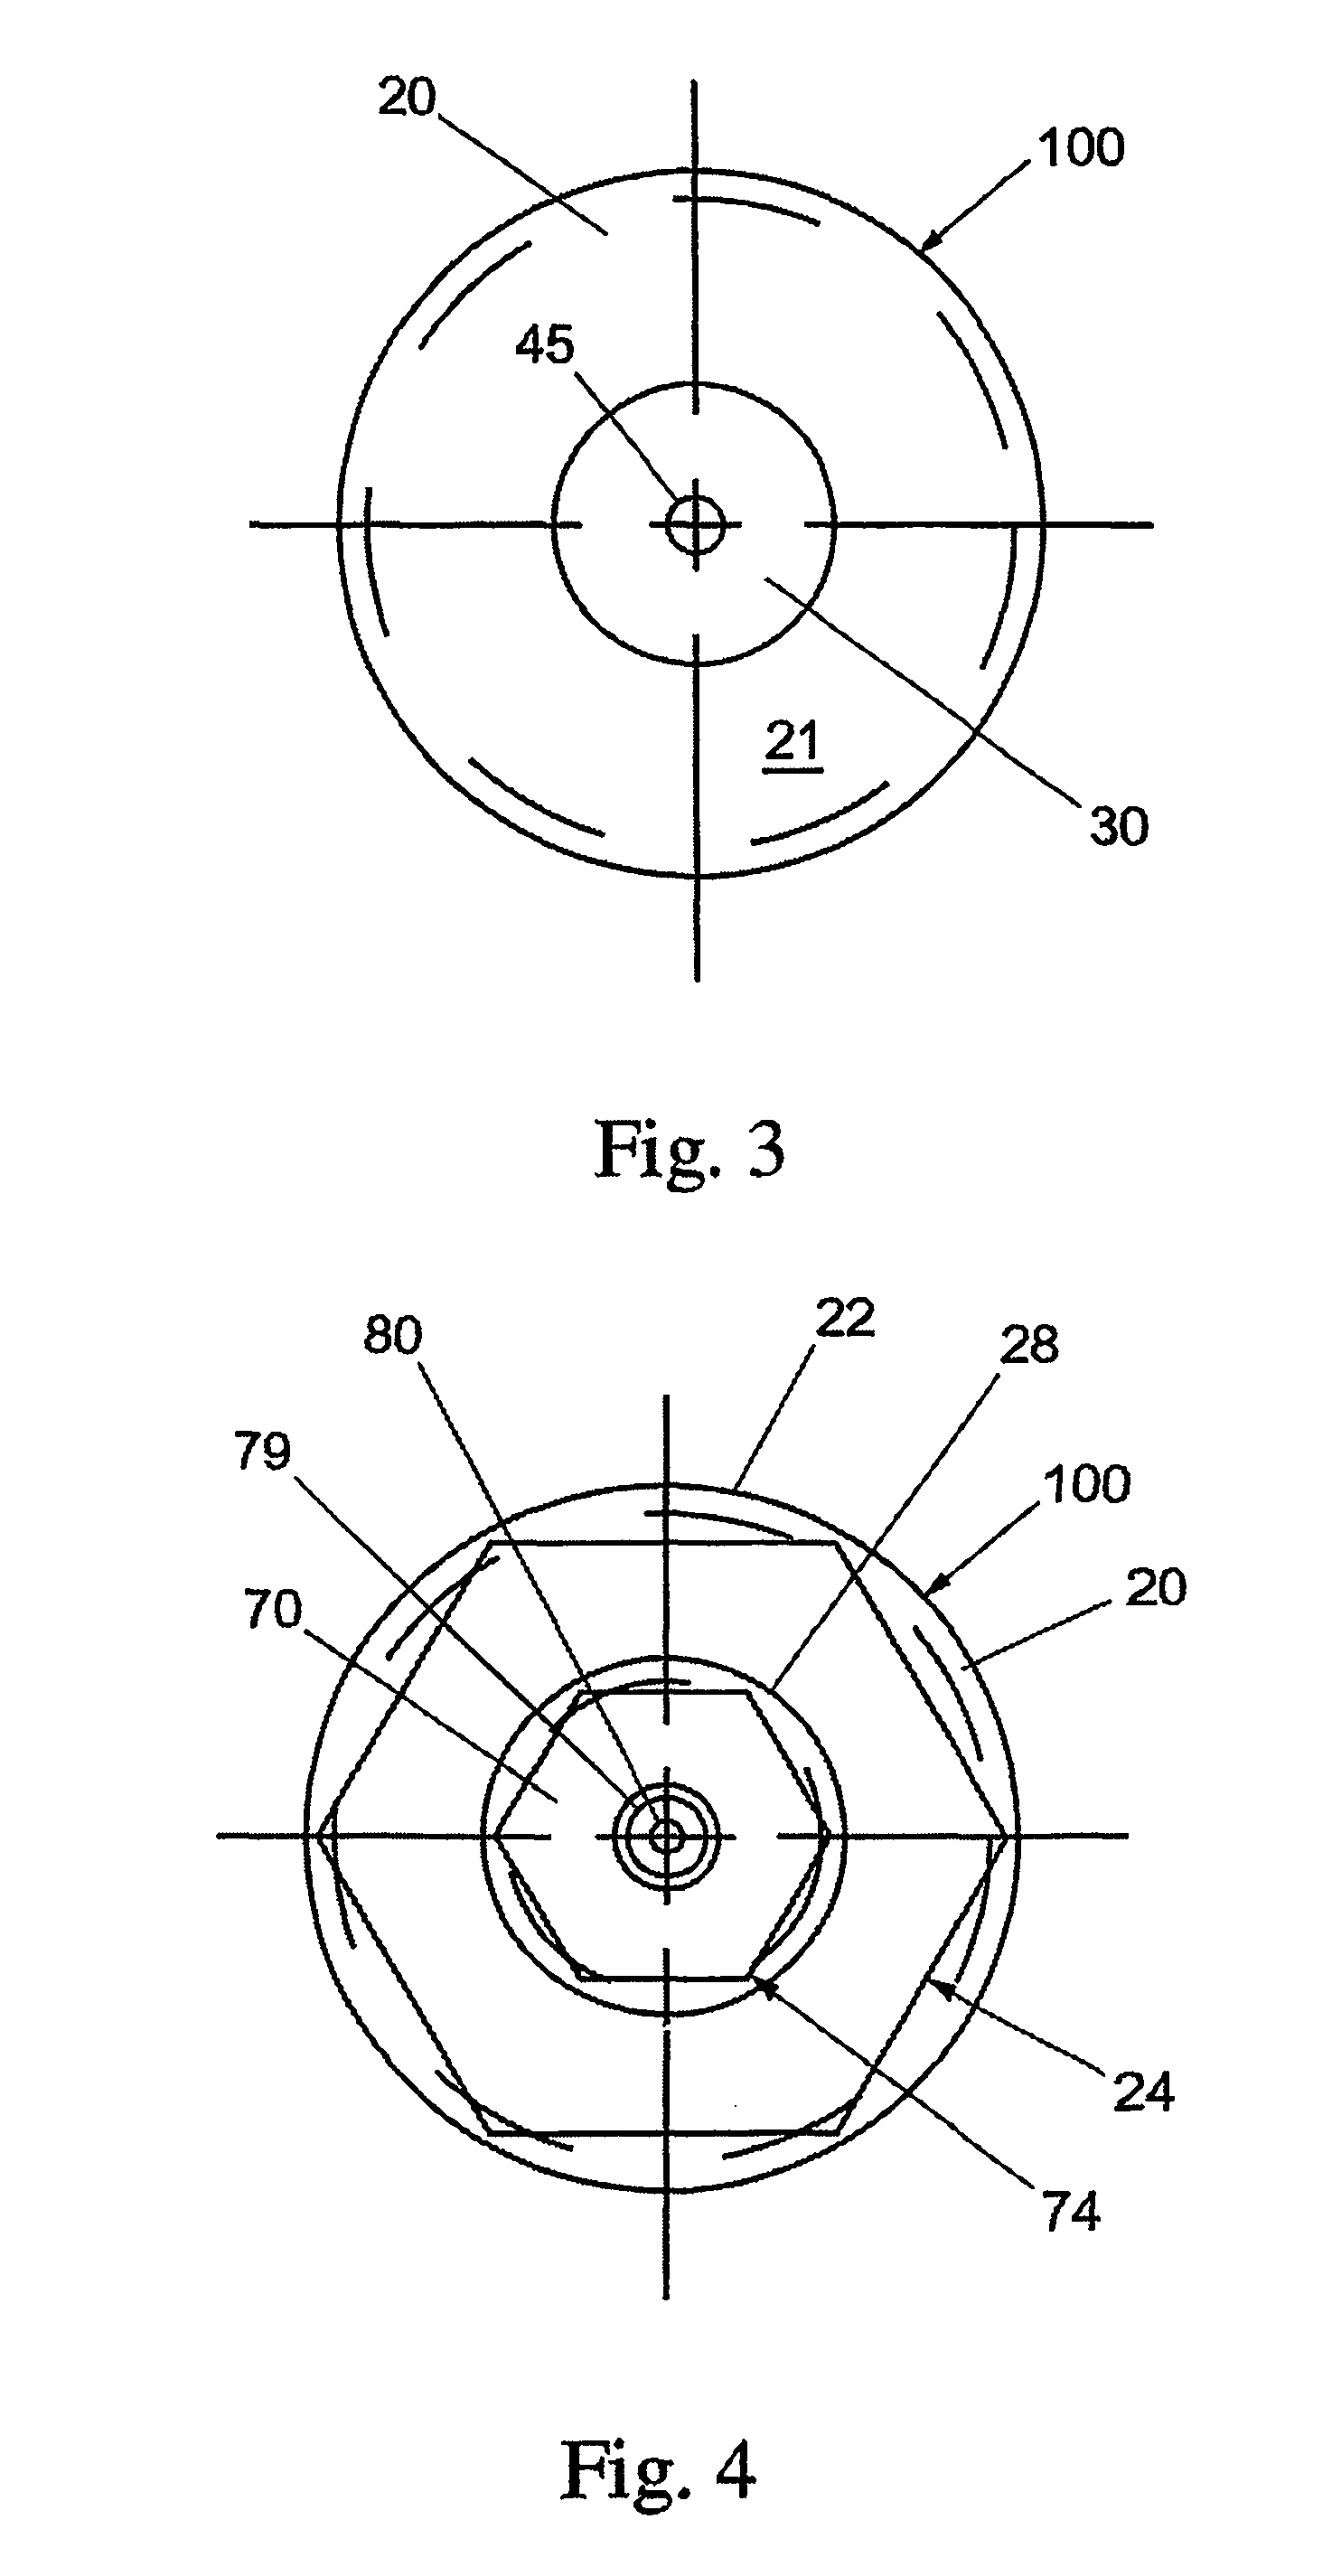 Probe cartridge assembly and multi-probe assembly